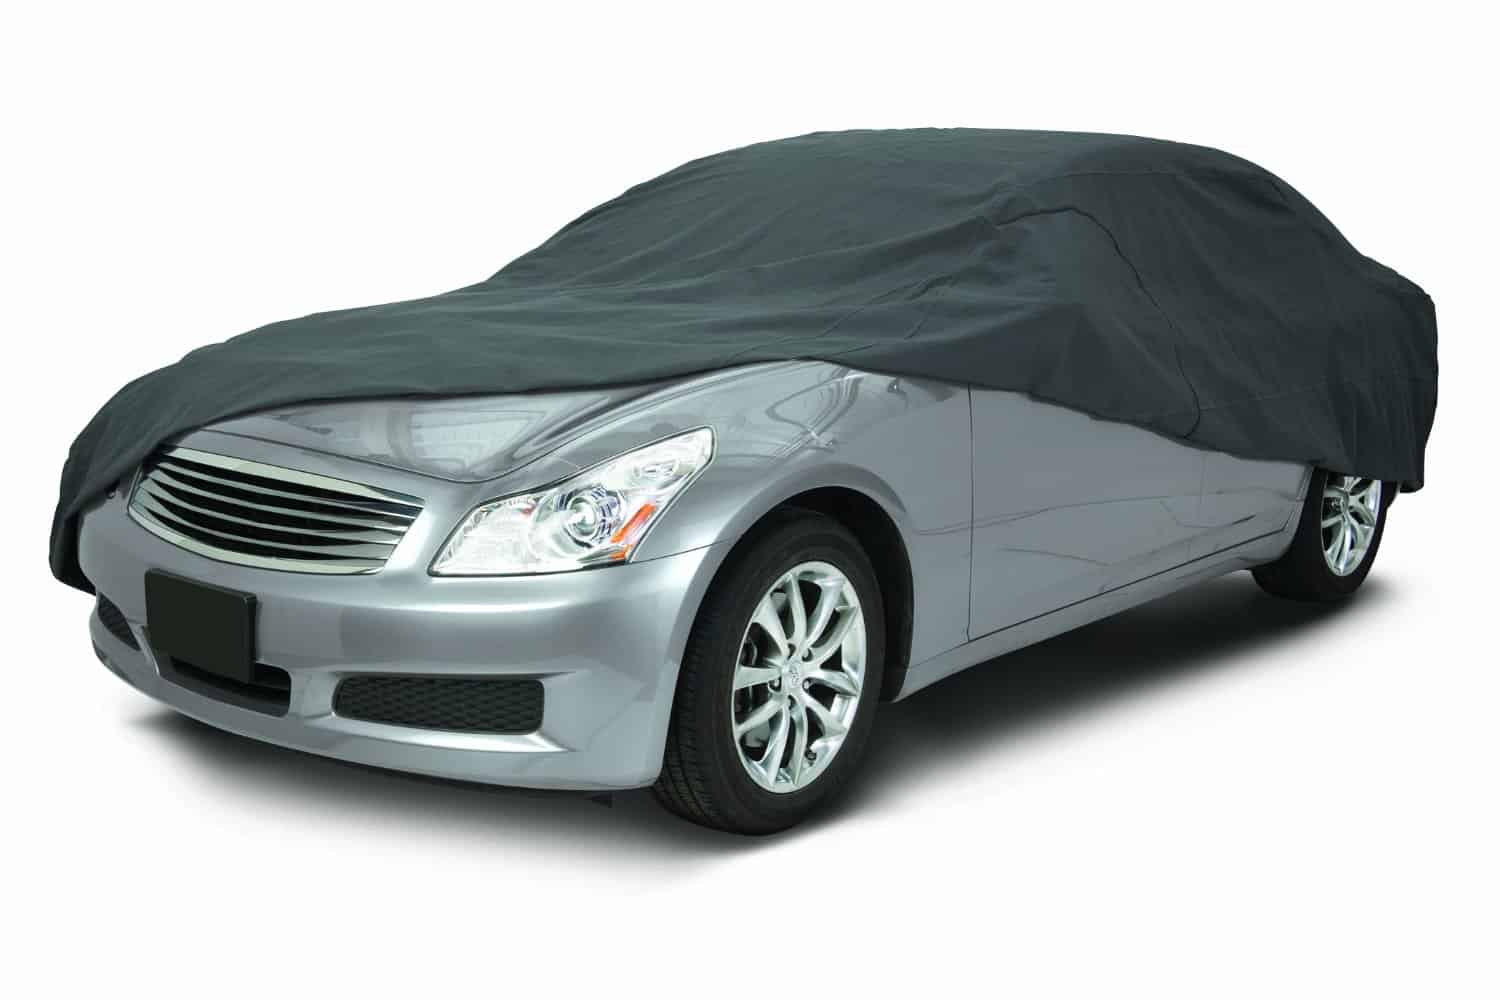 best-car-covers-for-outdoor-use-7